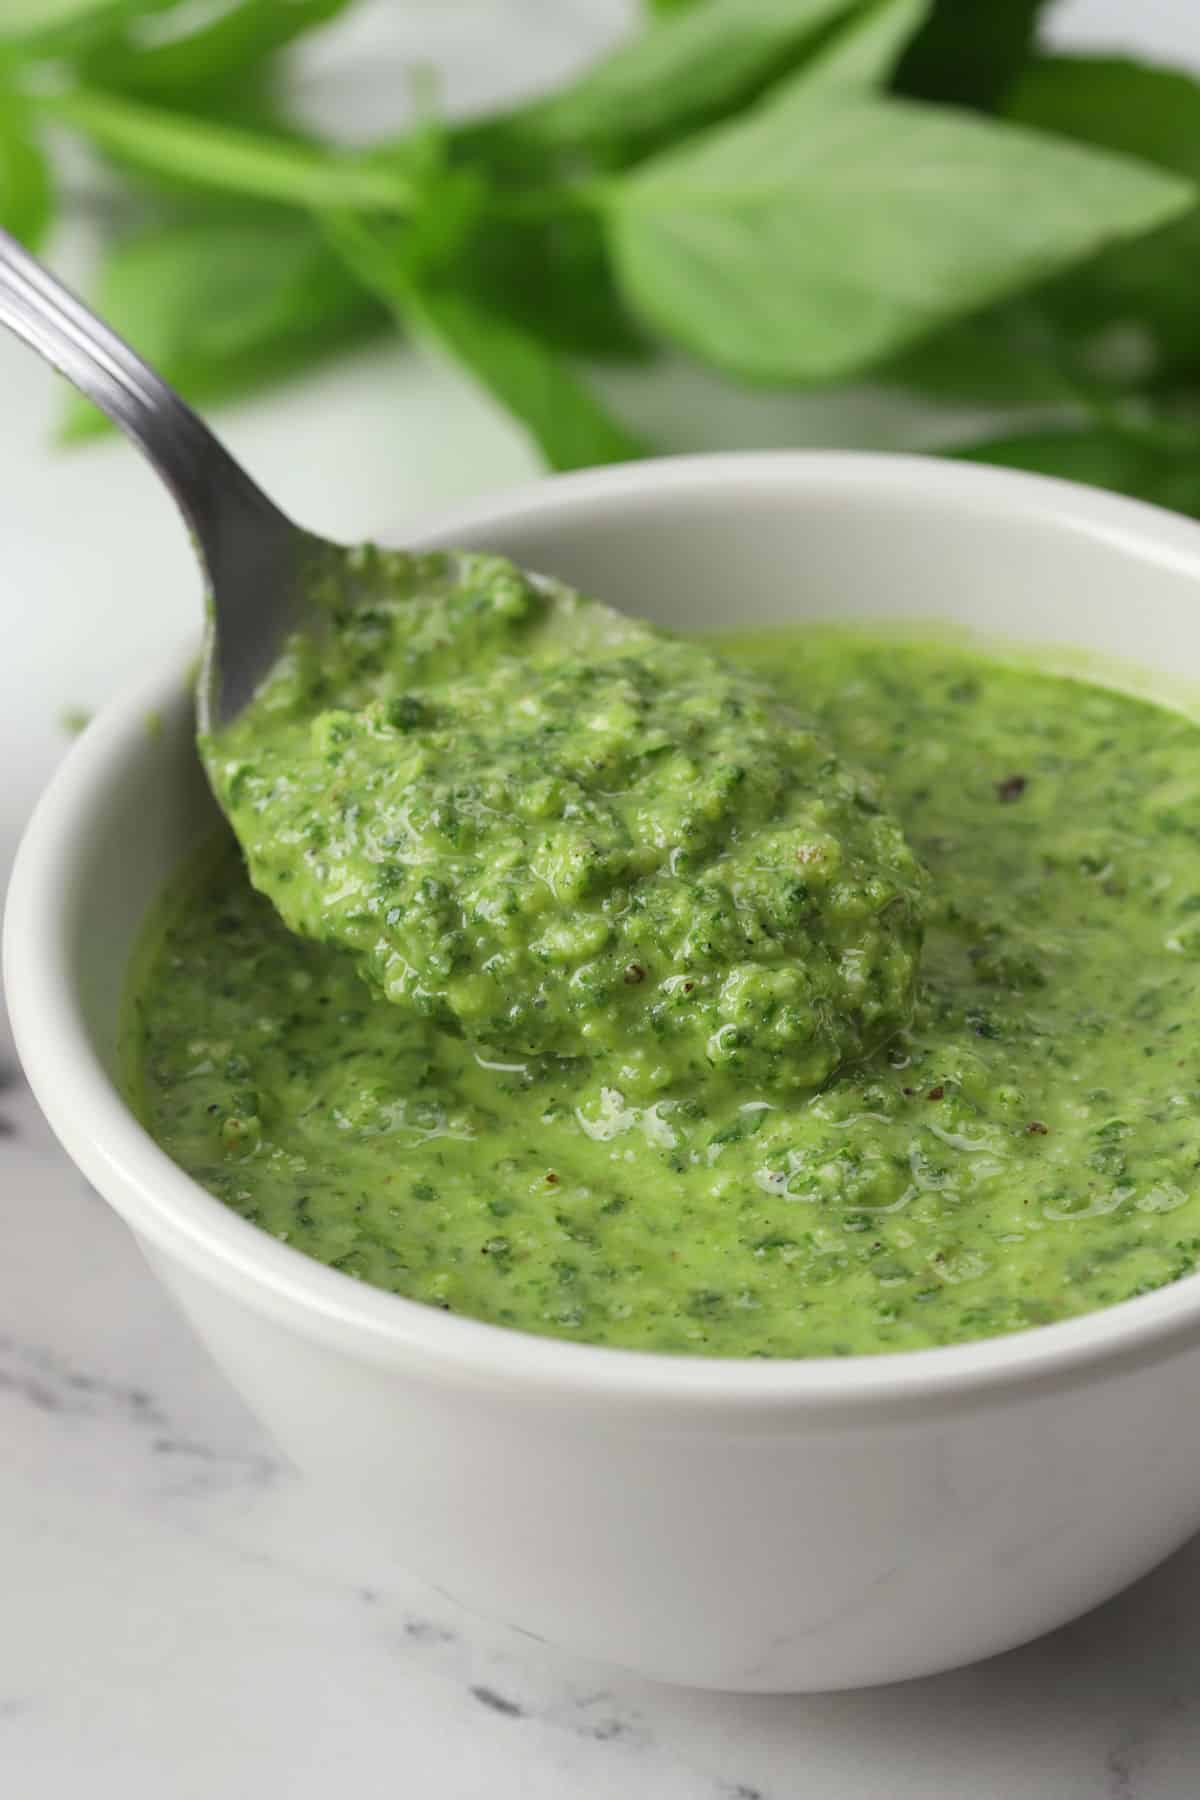 A spoon scooping pesto from a white bowl.